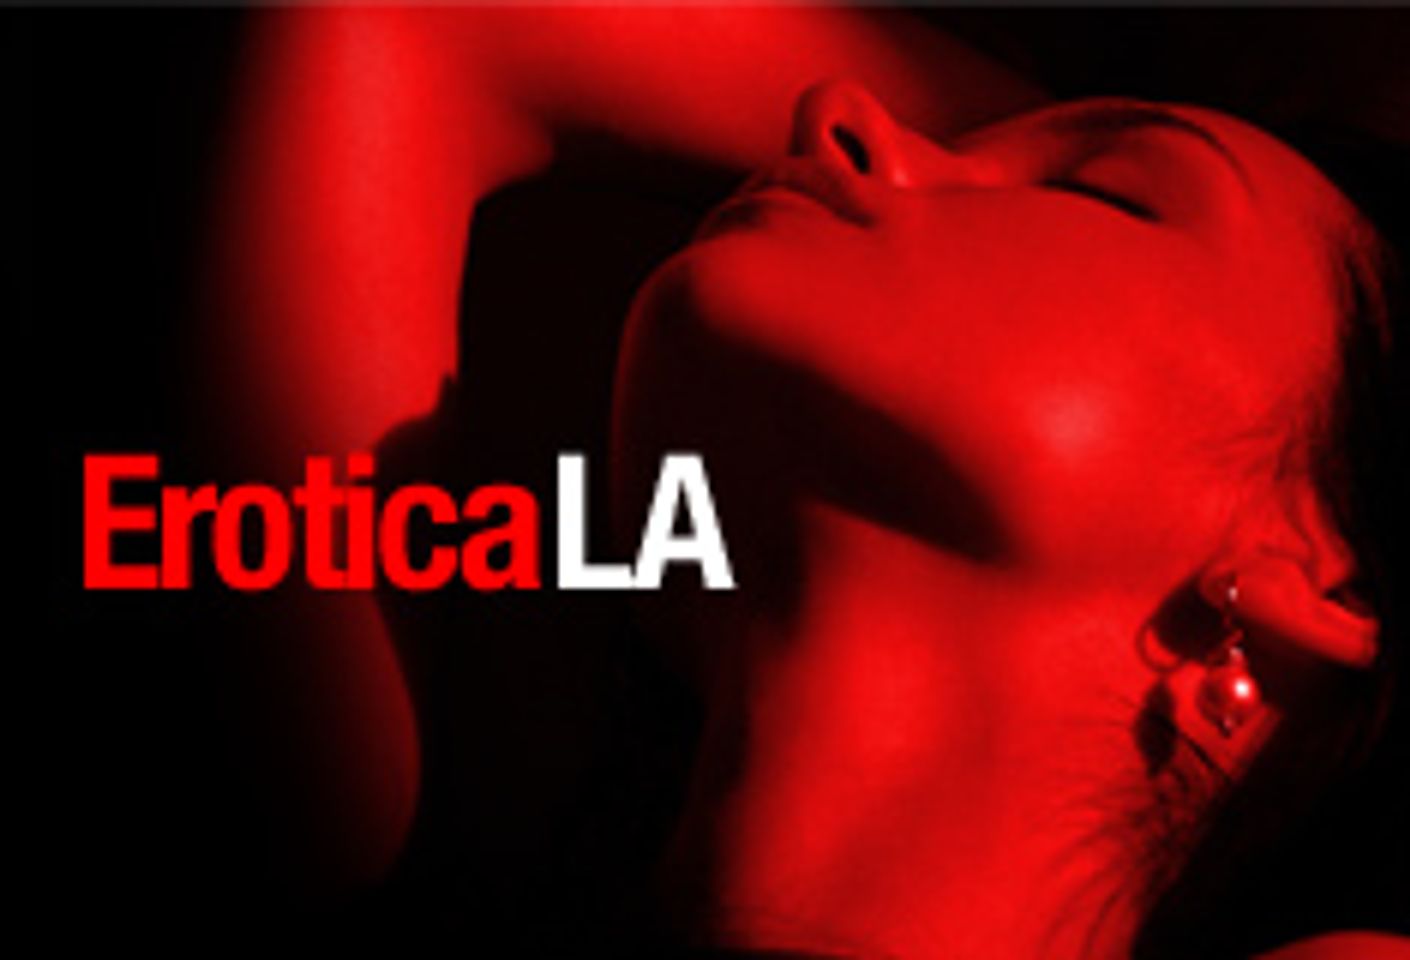 Erotica LA Heats Up with Some Real Sex in the City